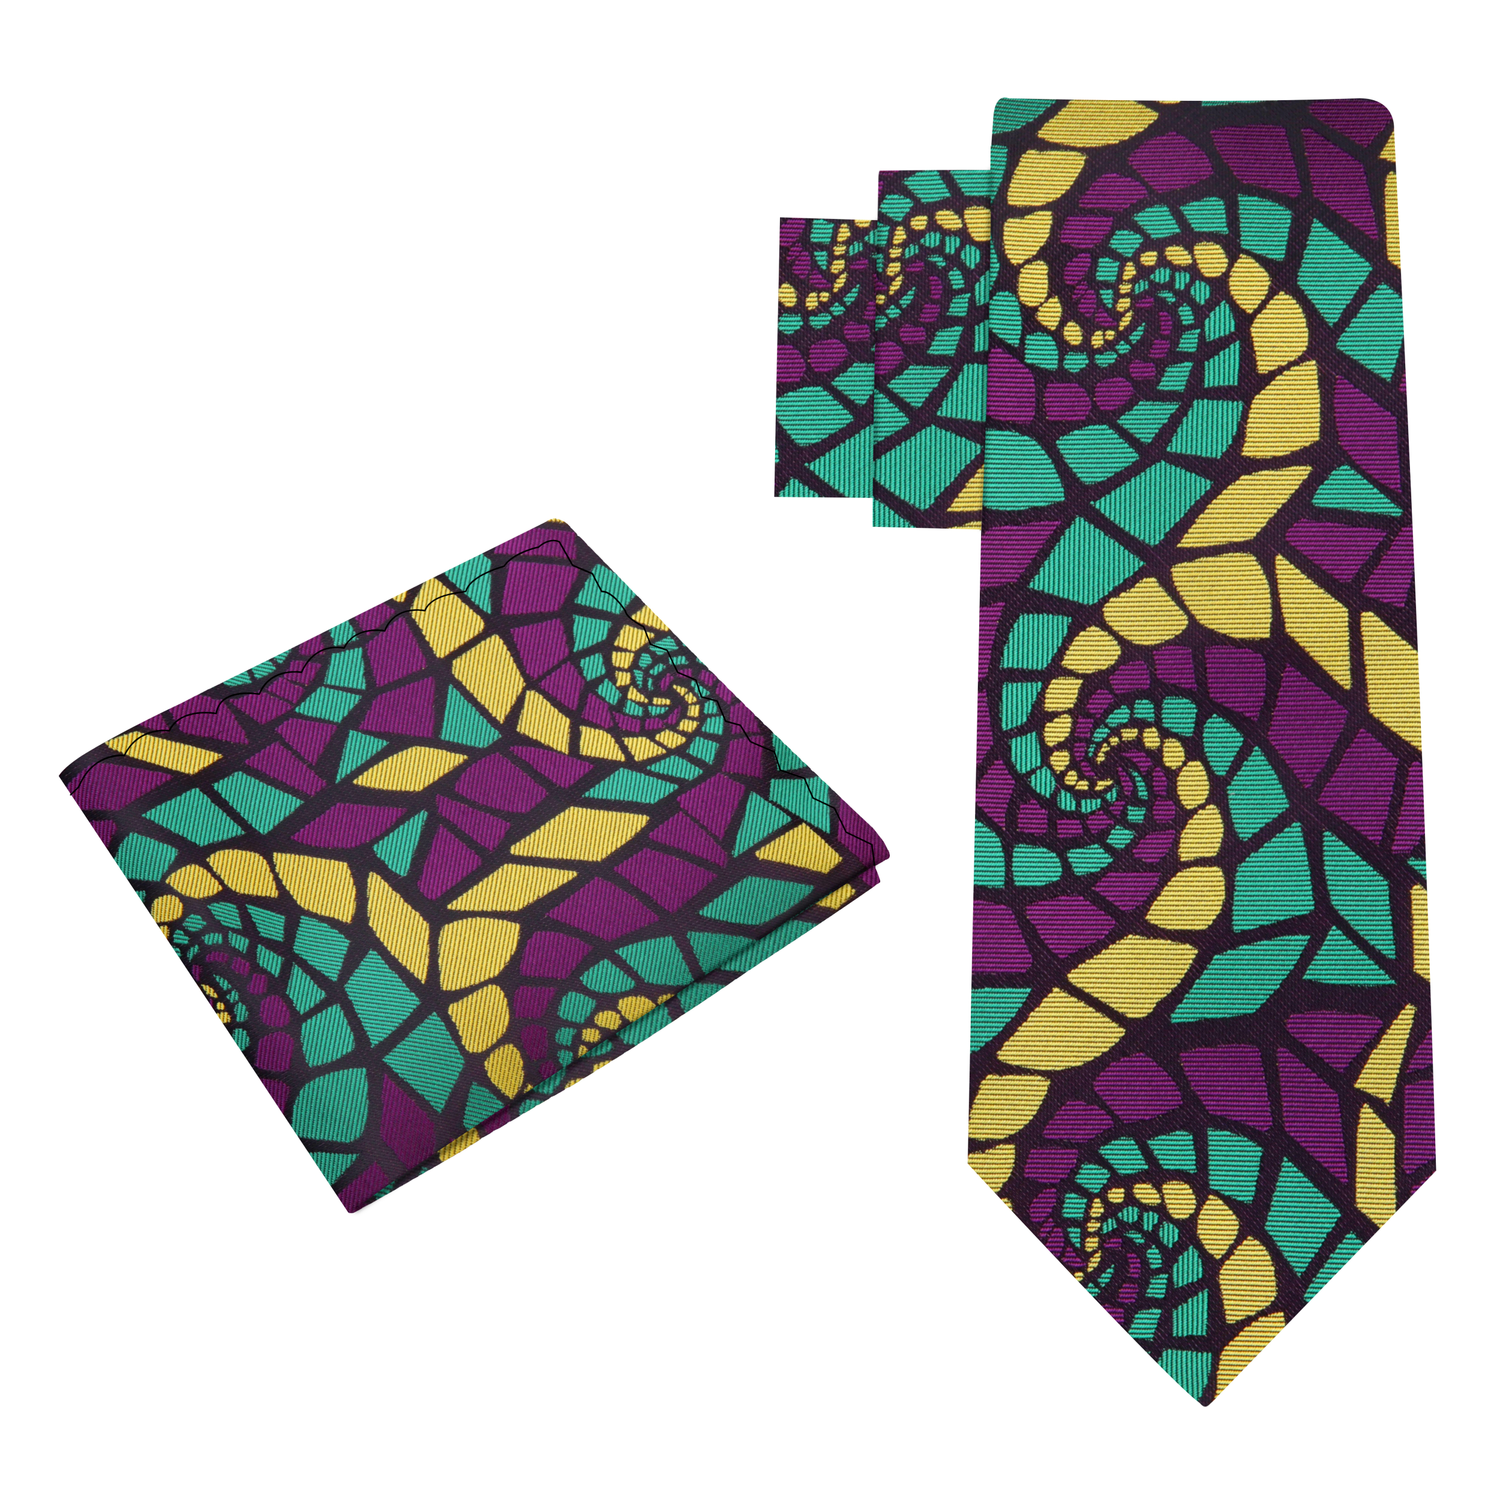 View 2: A Purple, Green, Gold Abstract Swirl Tie, Pocket Square